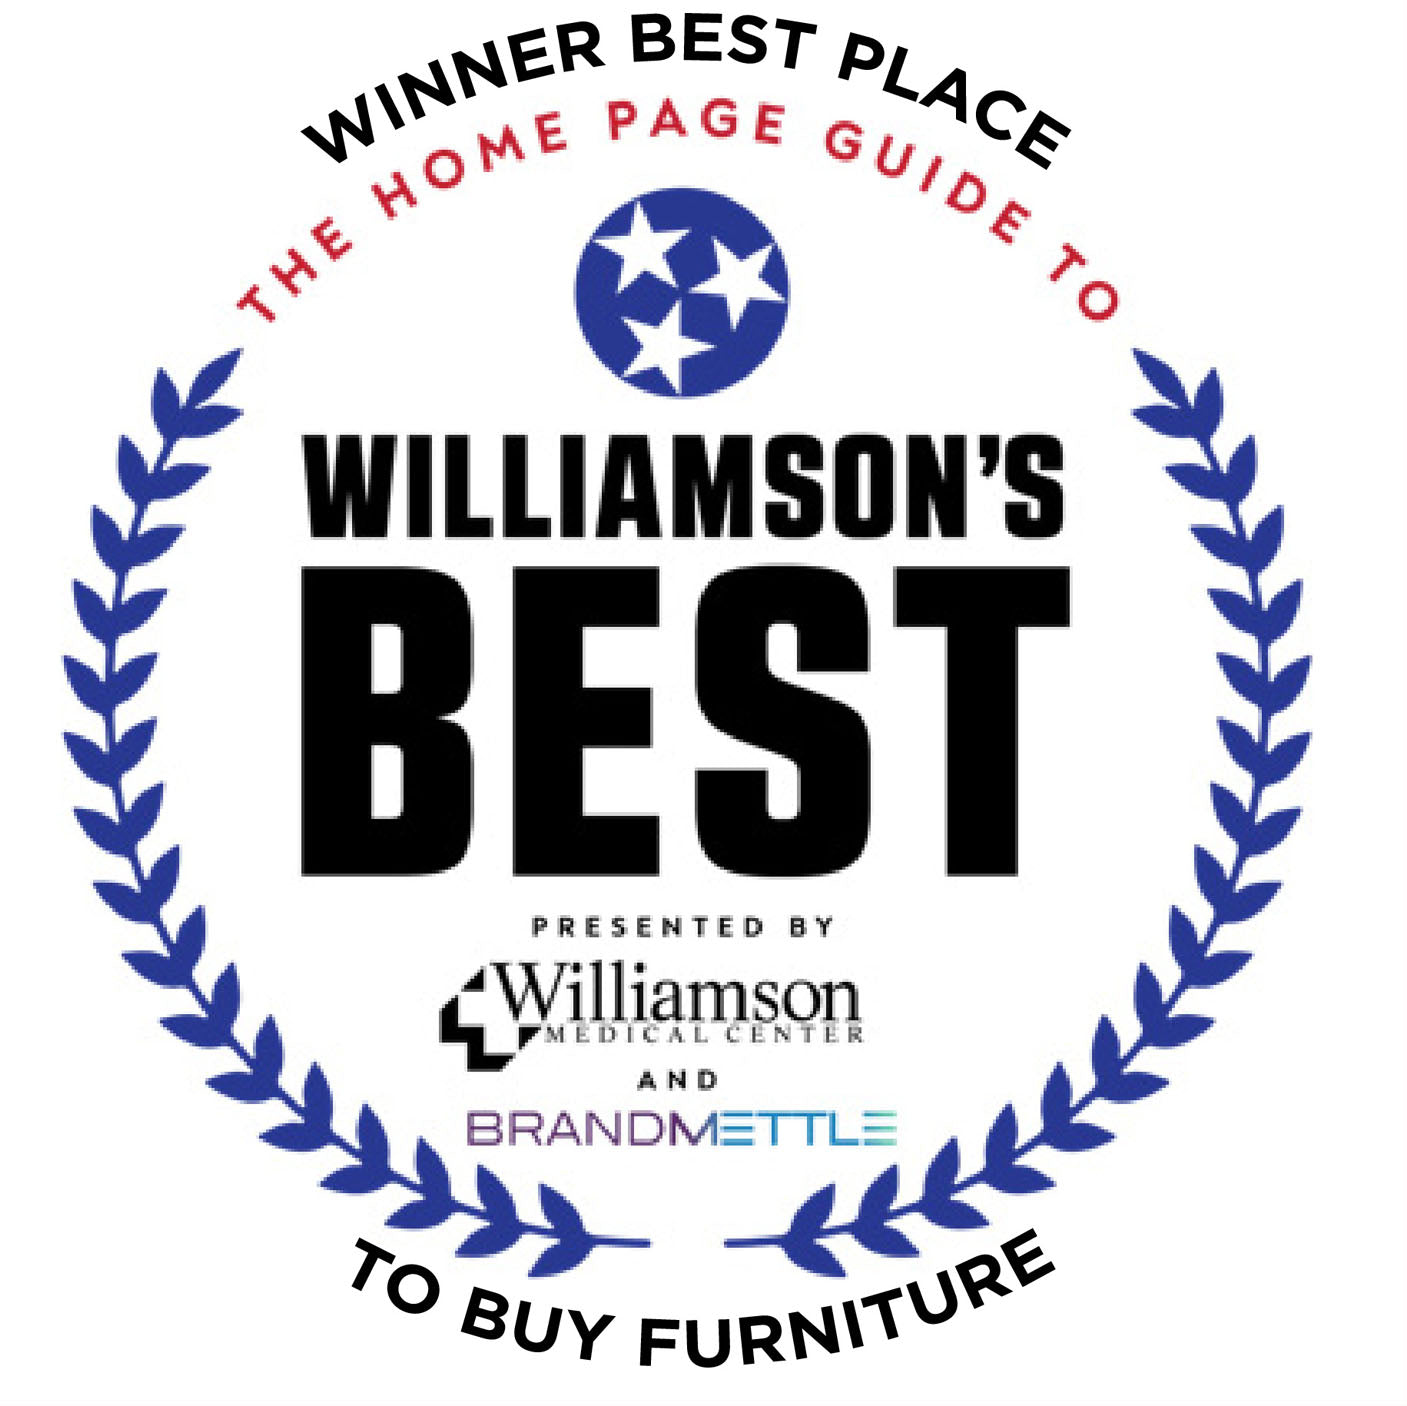 WILLIAMSON'S BEST PLACE TO BUY FURNITURE